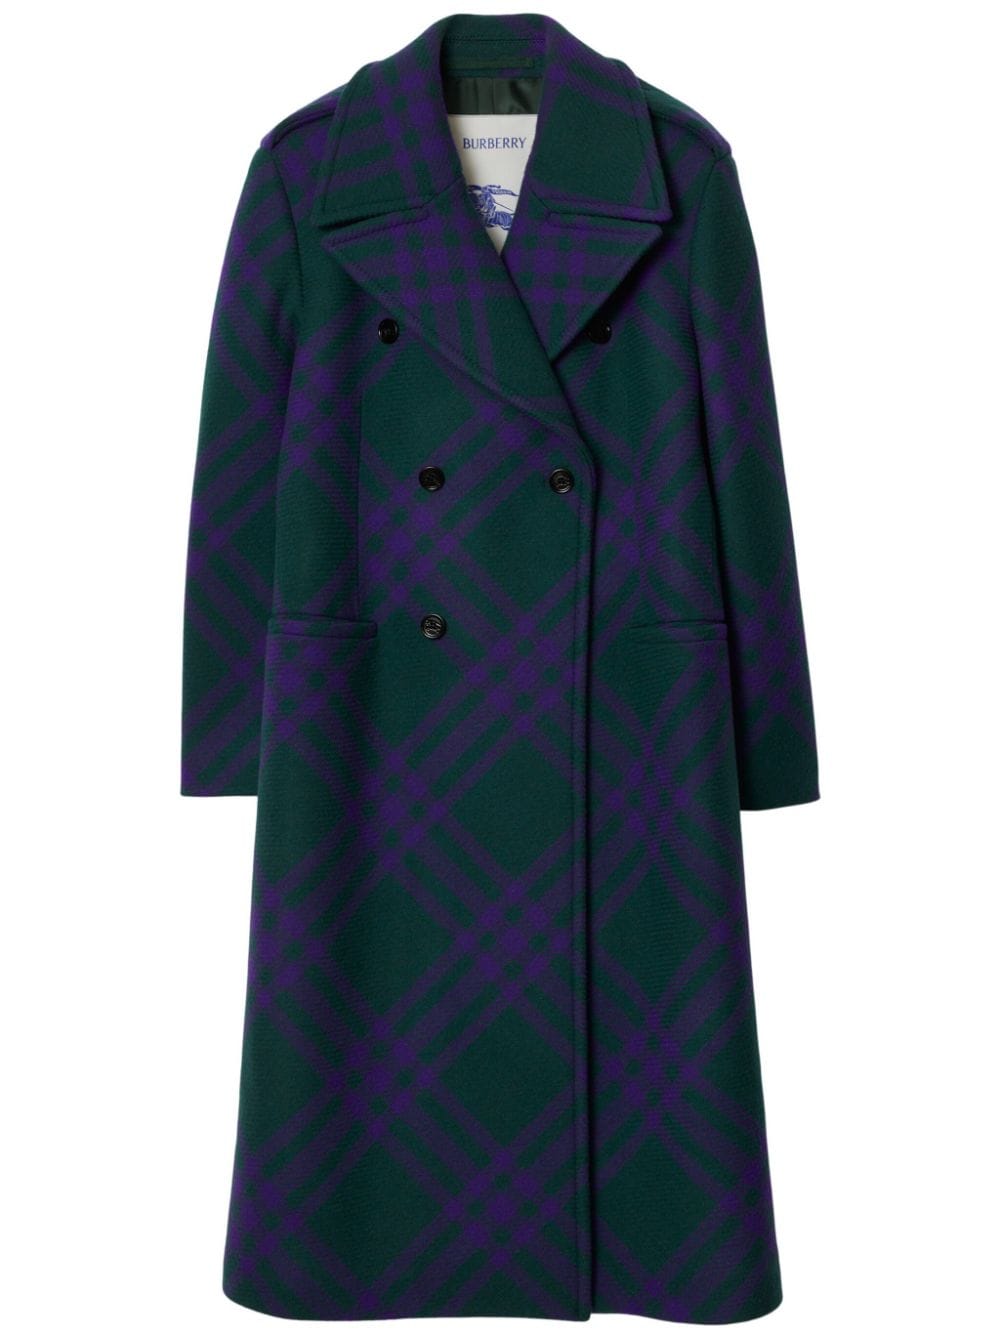 Burberry Check Wool Blend Coat In Deep Royal